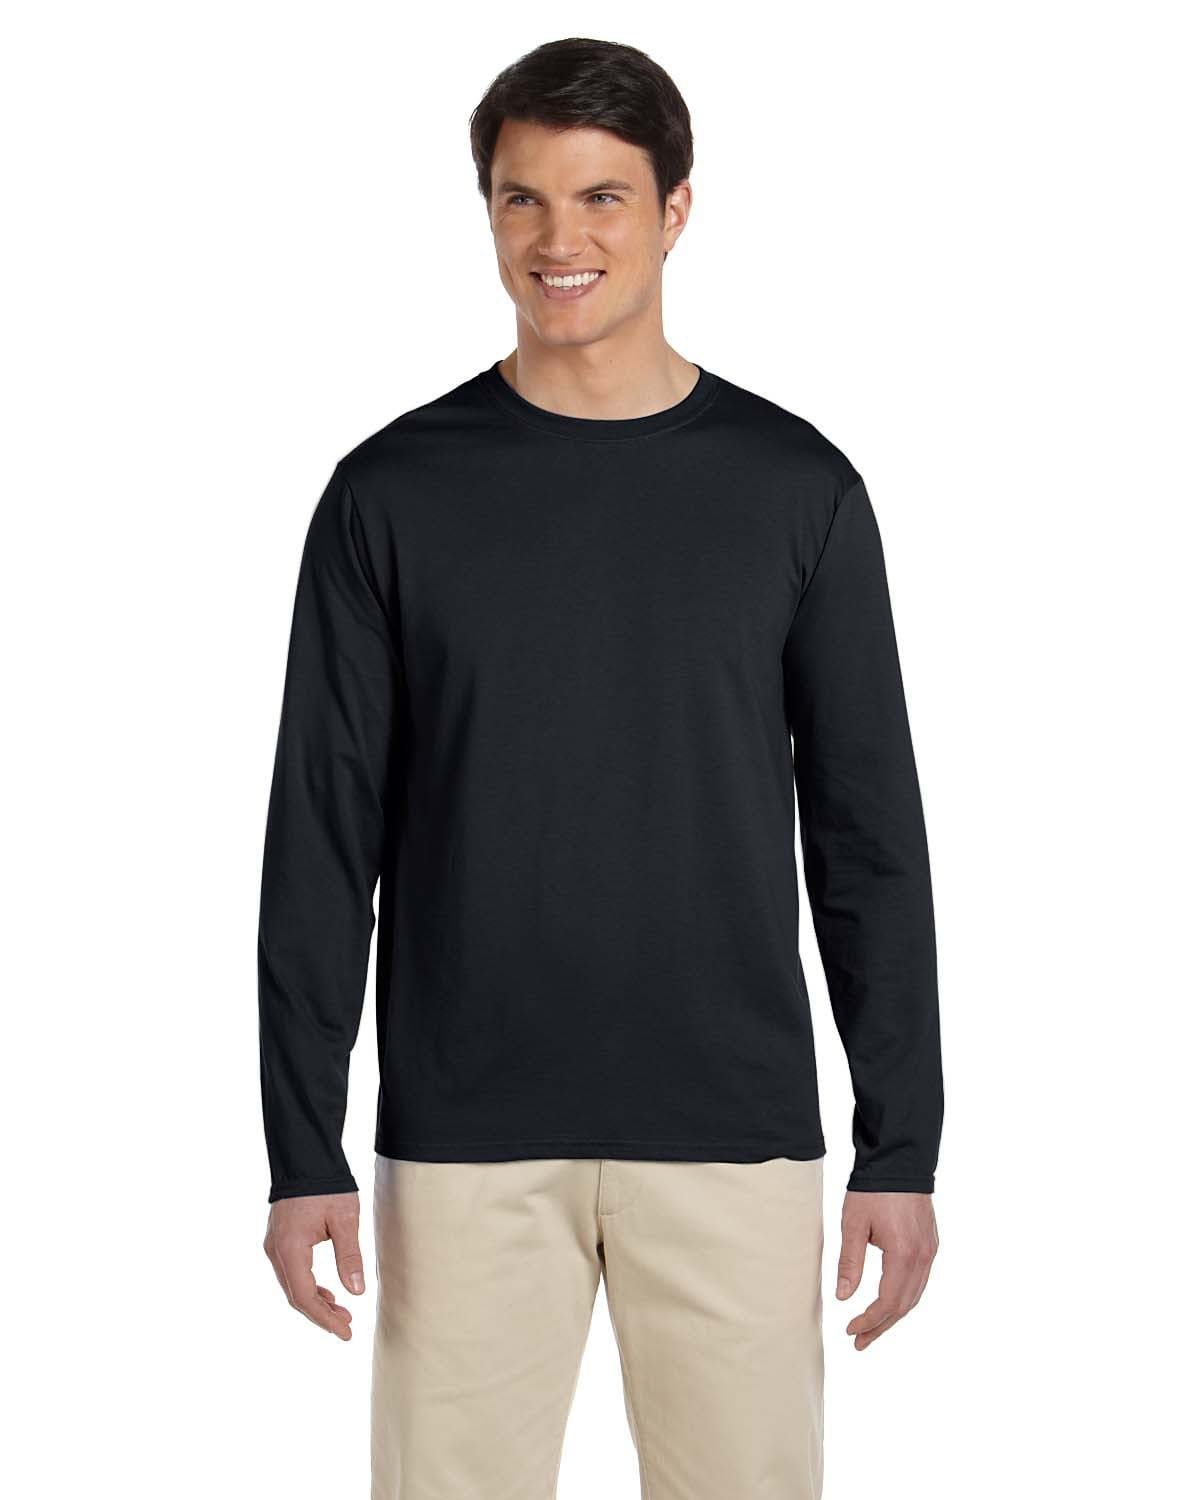 g644-adult-softstyle-4-5-oz-long-sleeve-t-shirt-Small-BLACK-Oasispromos